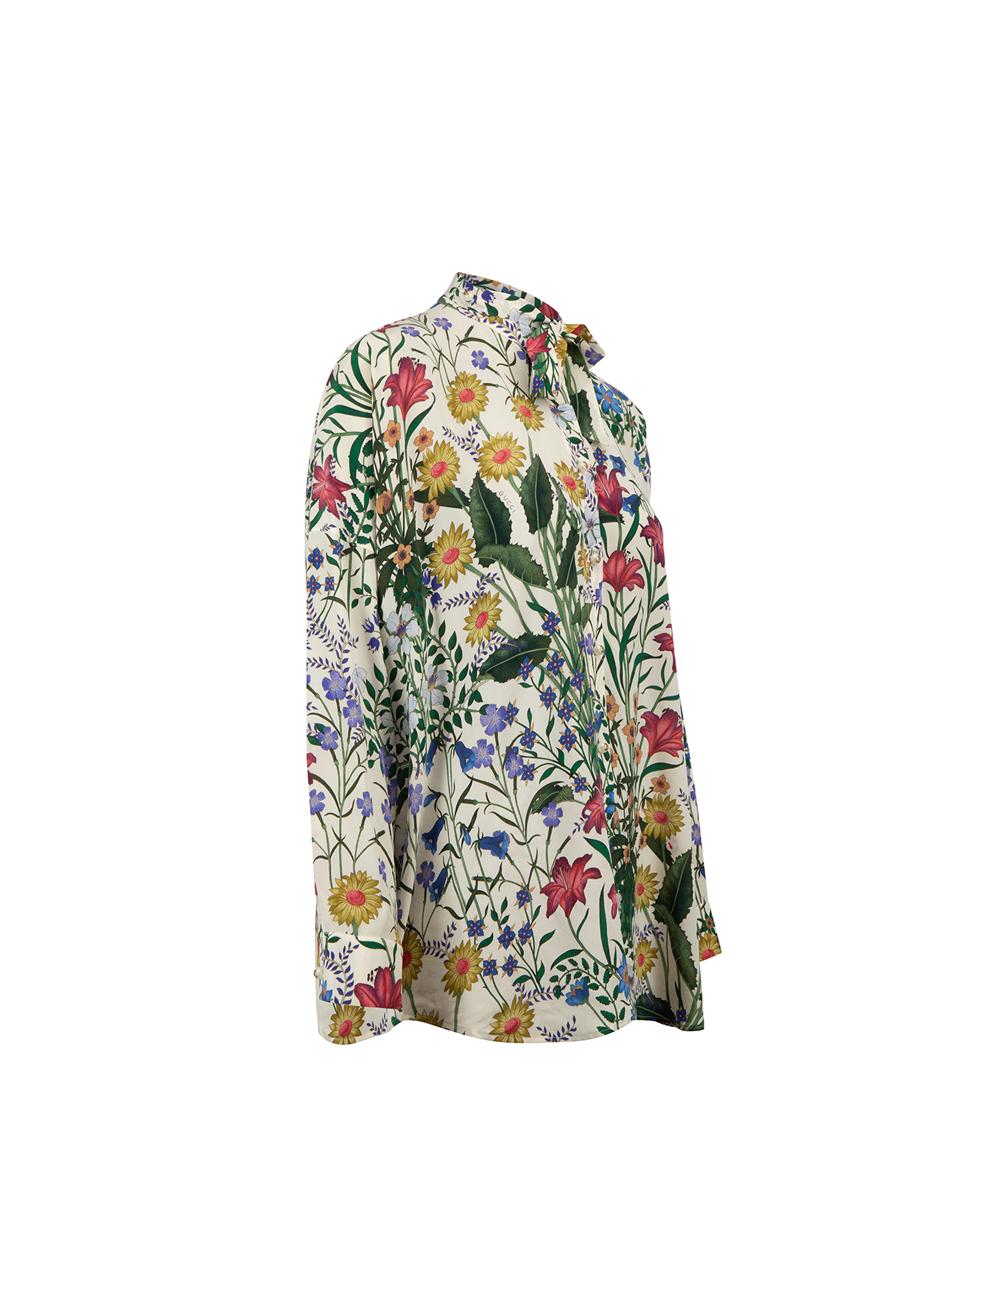 CONDITION is Very good. Minimal wear to shirt is evident. Minimal wear to the front and rear with discoloured marks on this used Gucci designer resale item.



Details


Multicolour

Silk

Long sleeves blouse

Floral print pattern

Front button up